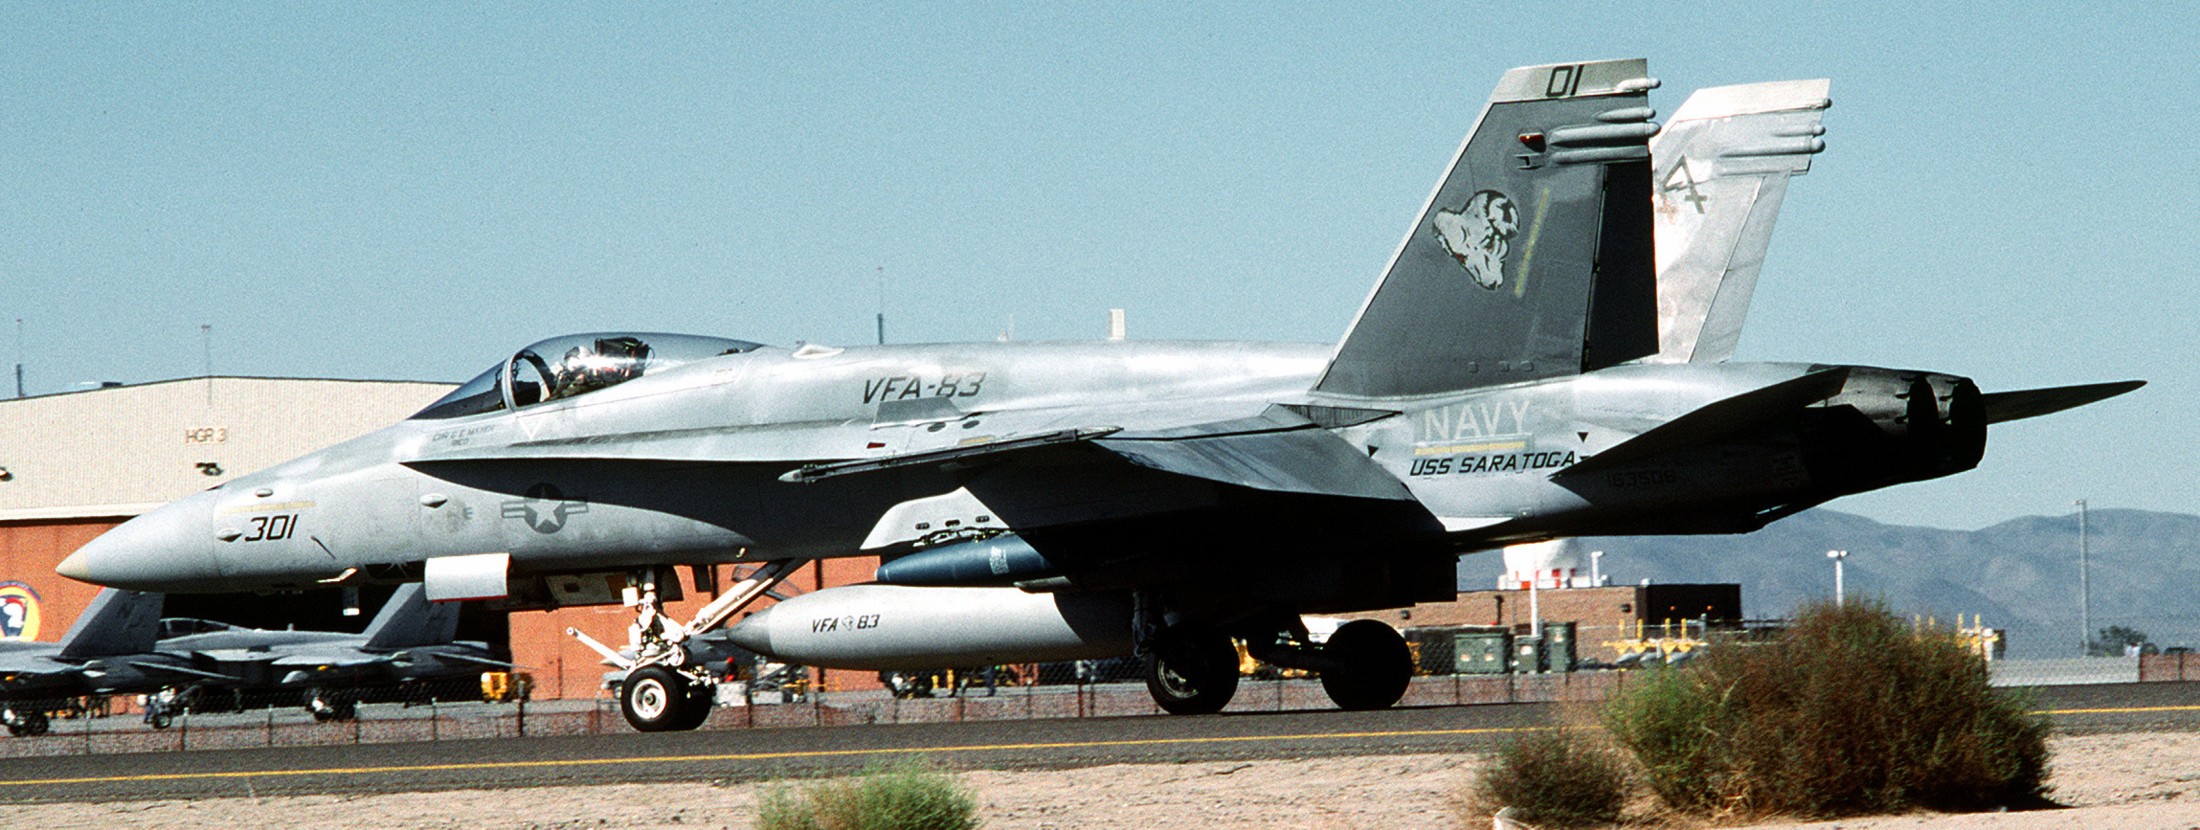 vfa-83 rampagers strike fighter squadron f/a-18c hornet cvw-17 147p uss saratoga